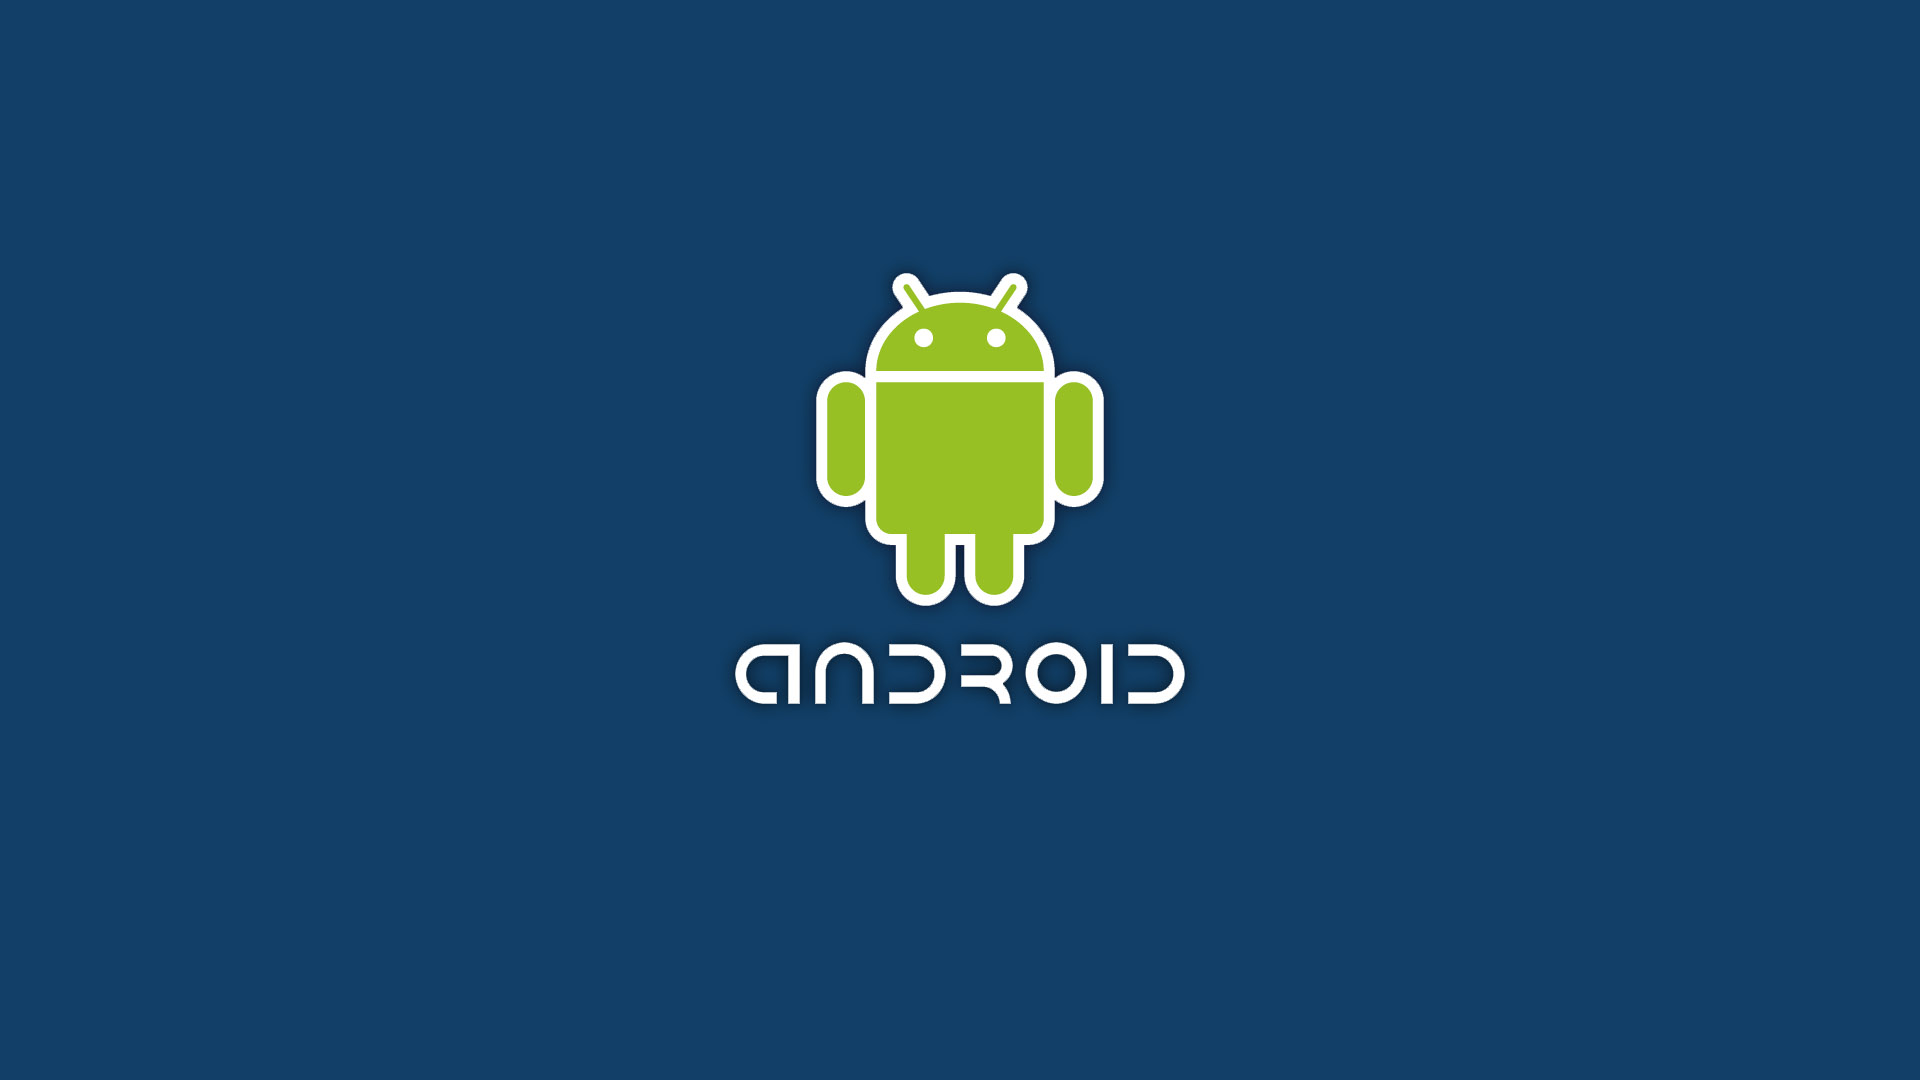 Android Logo On Blue Background Wallpaper For Nokia Asha